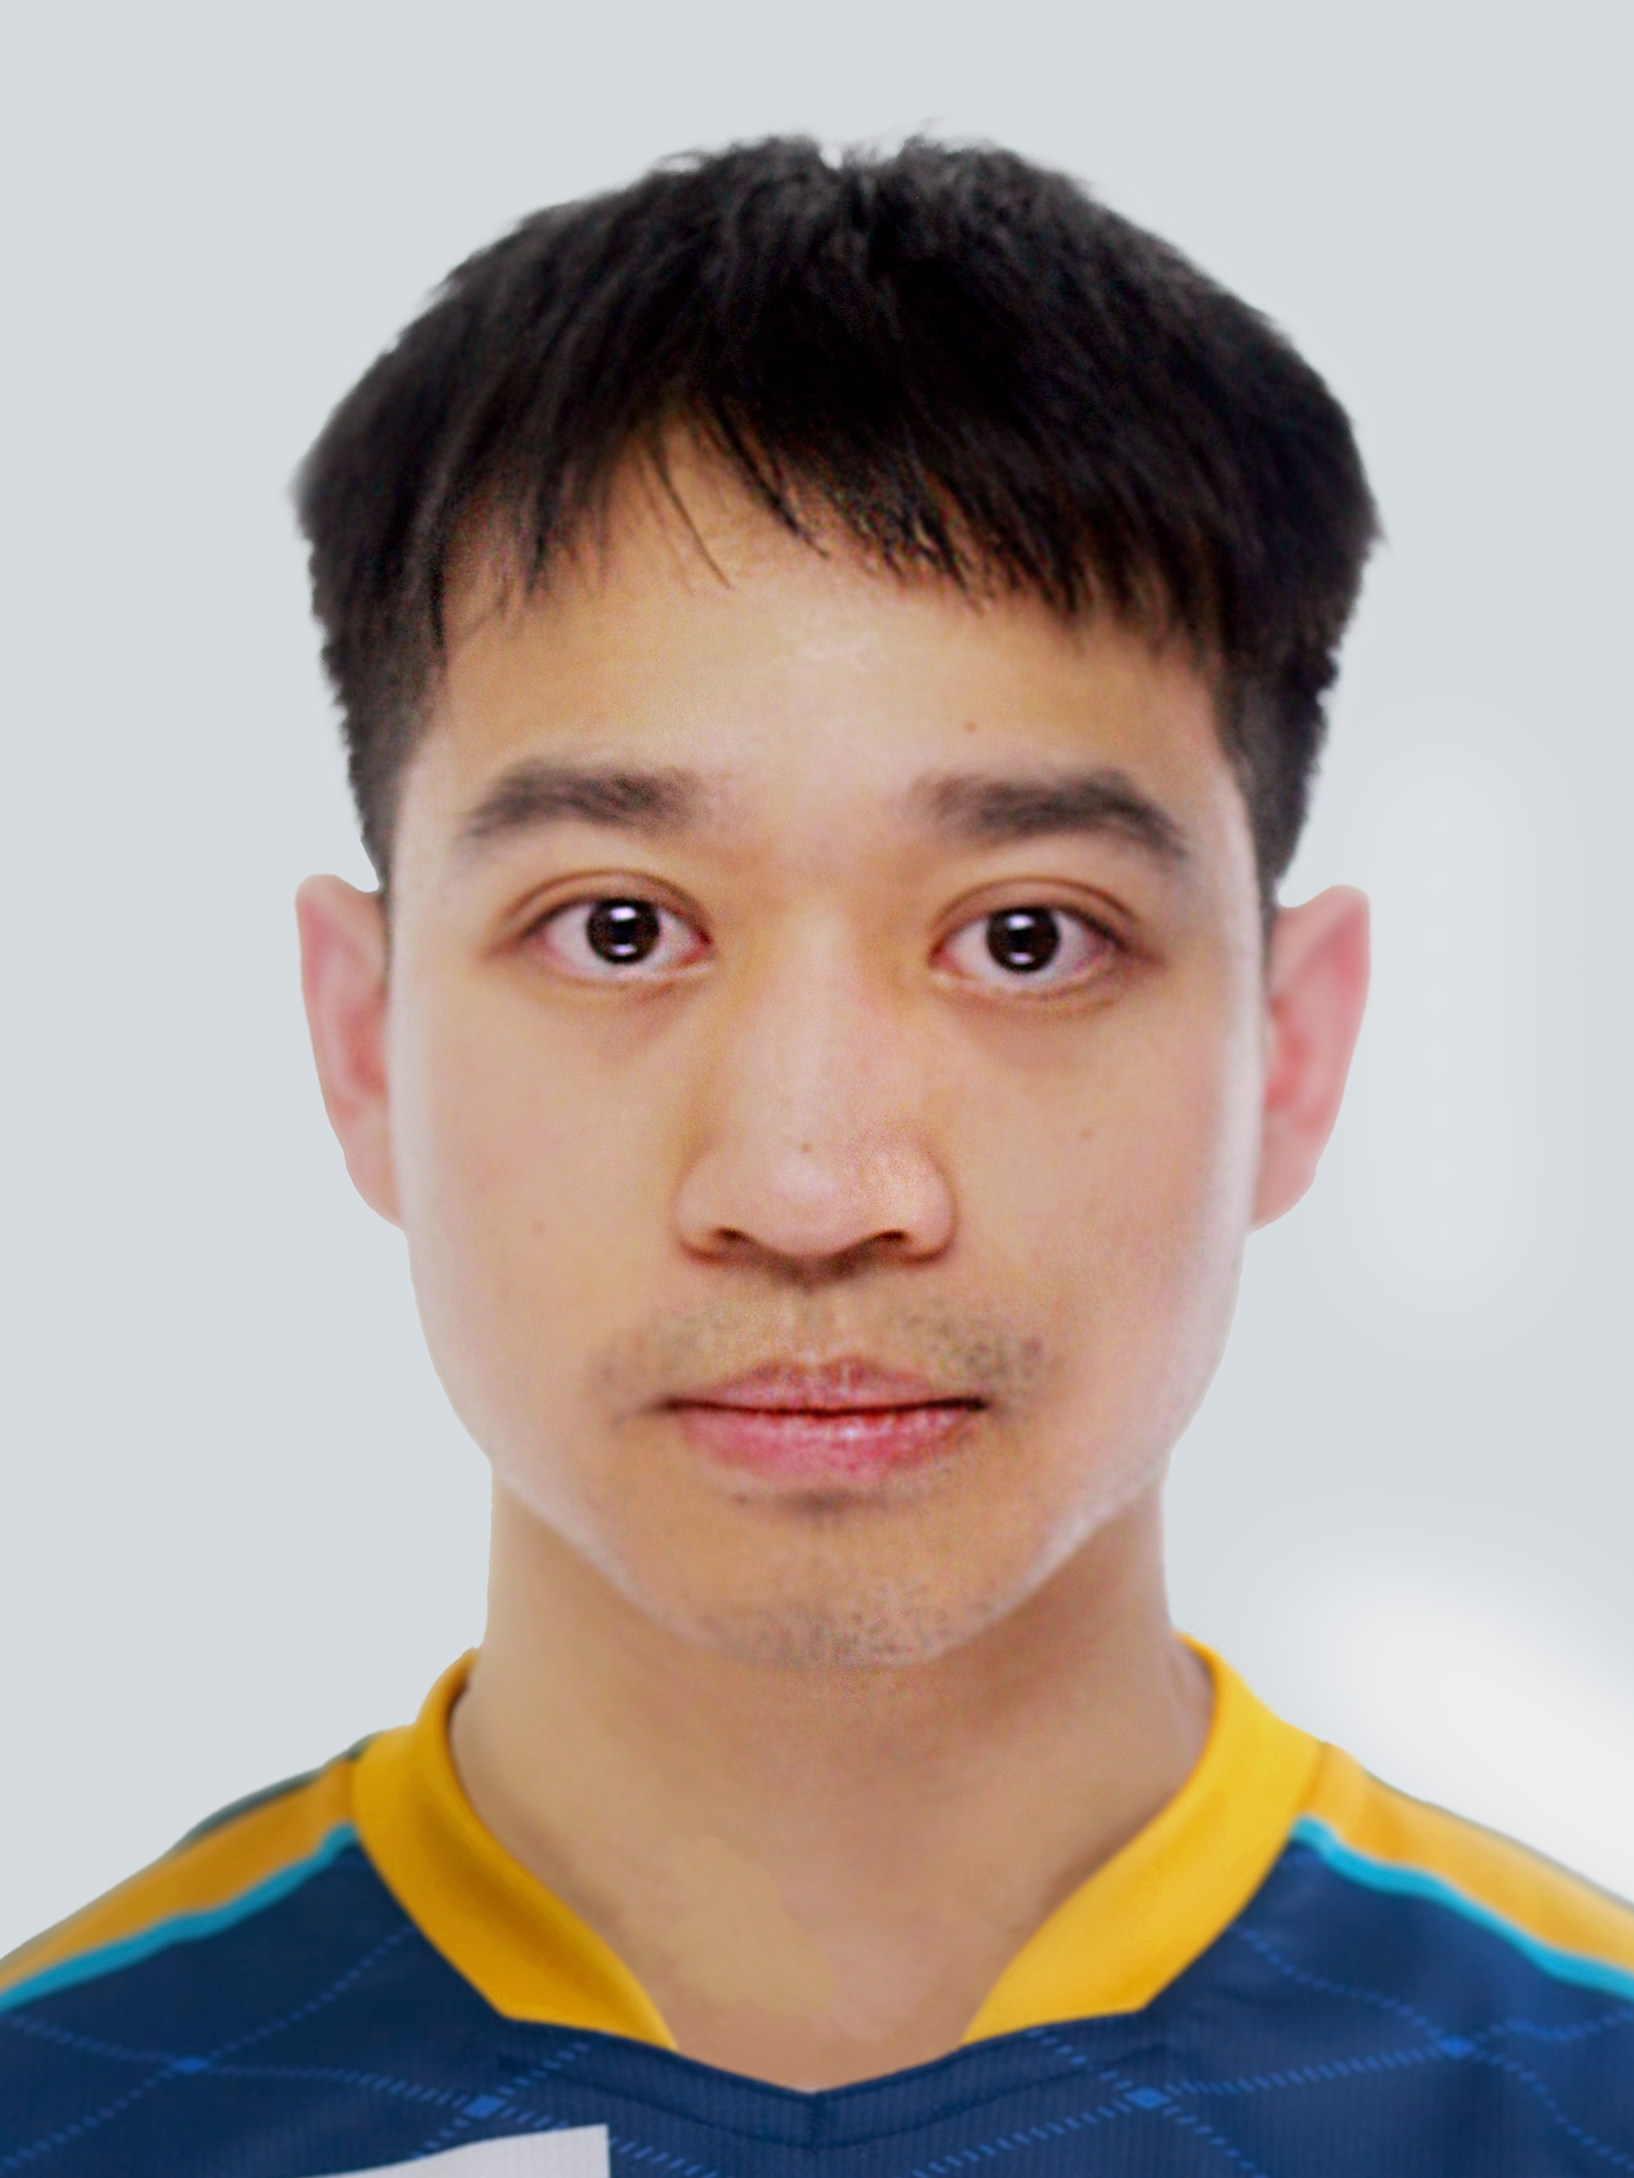 liao-profile-0801.png